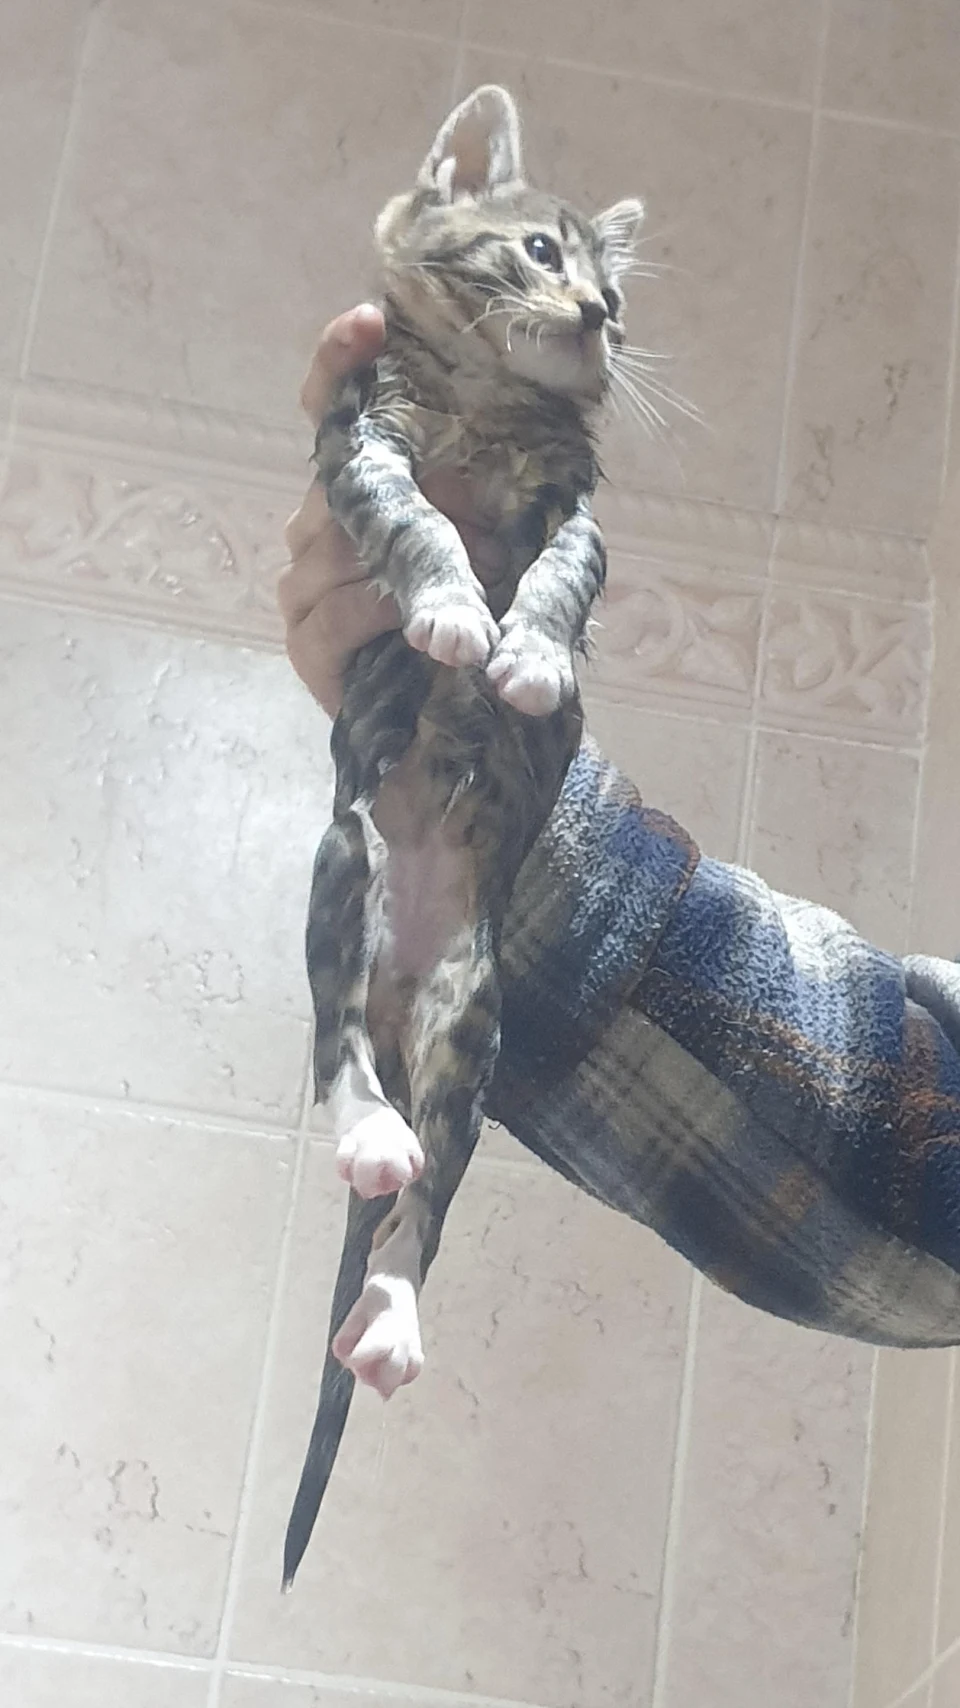 Nibbler fell into the bath. Why does he look so proud of himself.